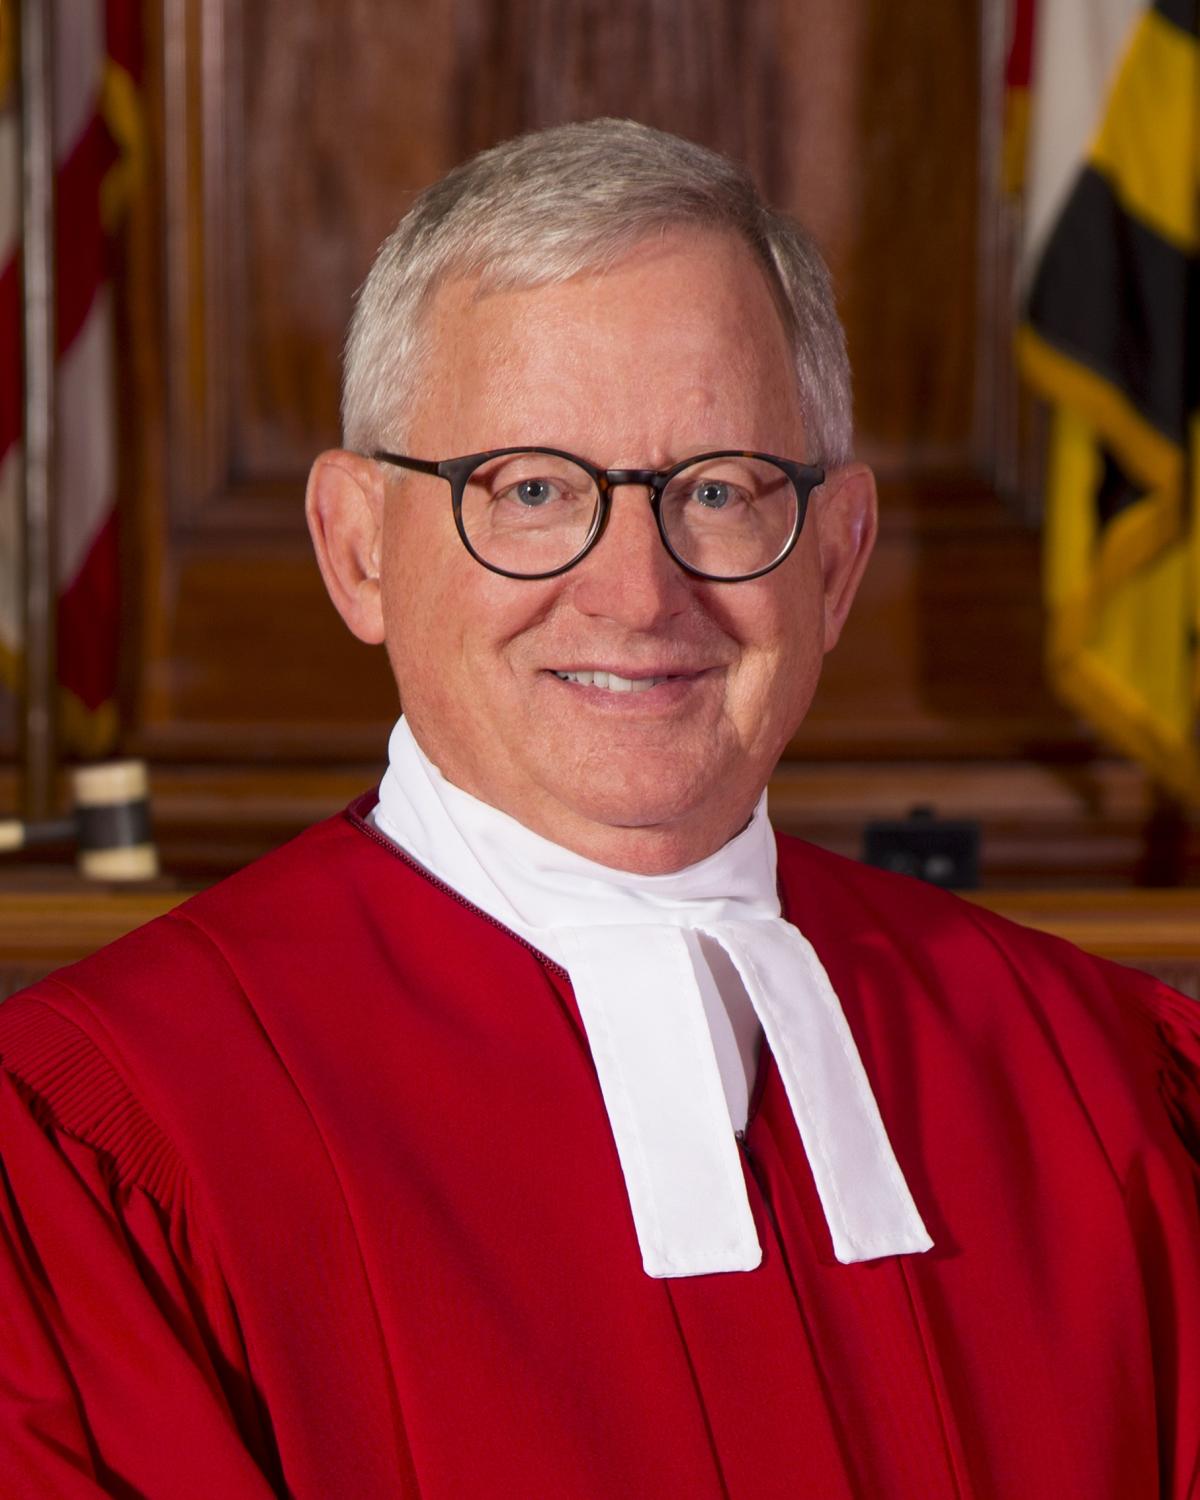 Honorable Joseph M. Getty ’74 Tapped as 2022 Commencement Speaker